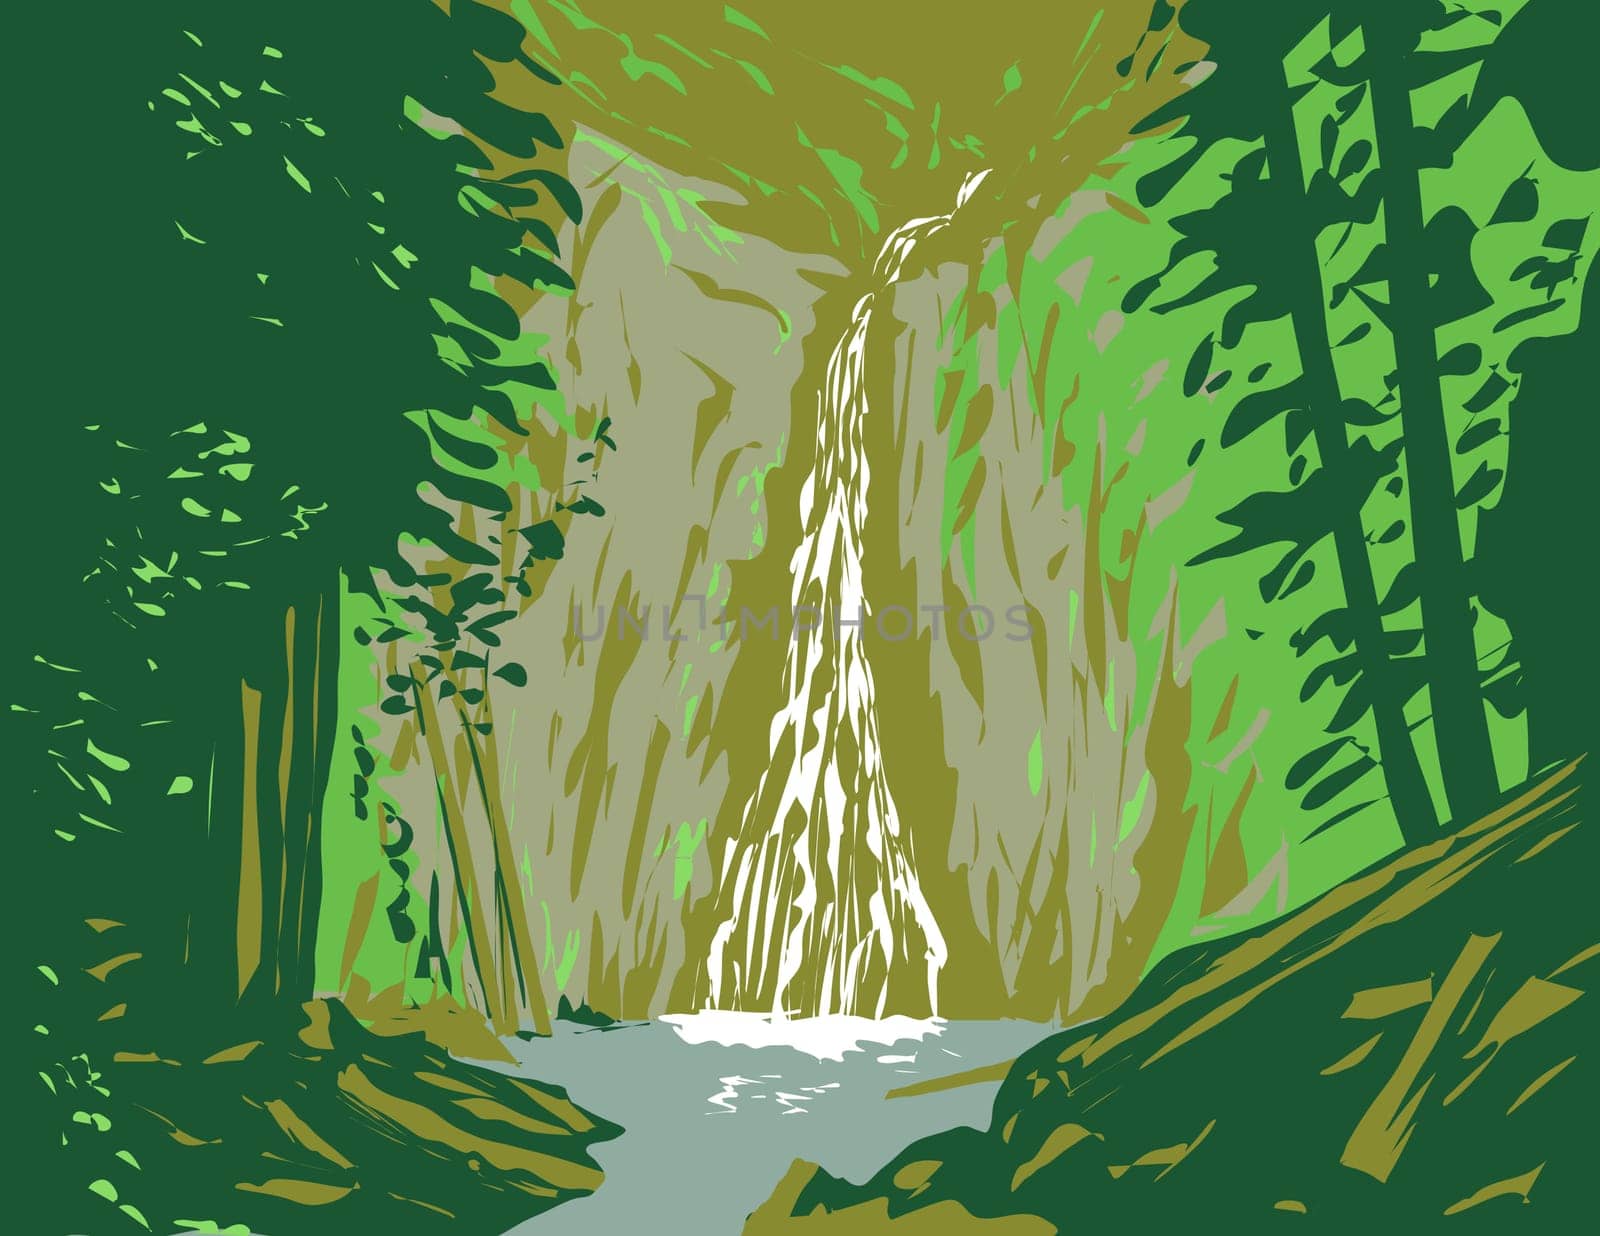 Madison Falls in Olympic National Park Washington State WPA Poster Art by patrimonio